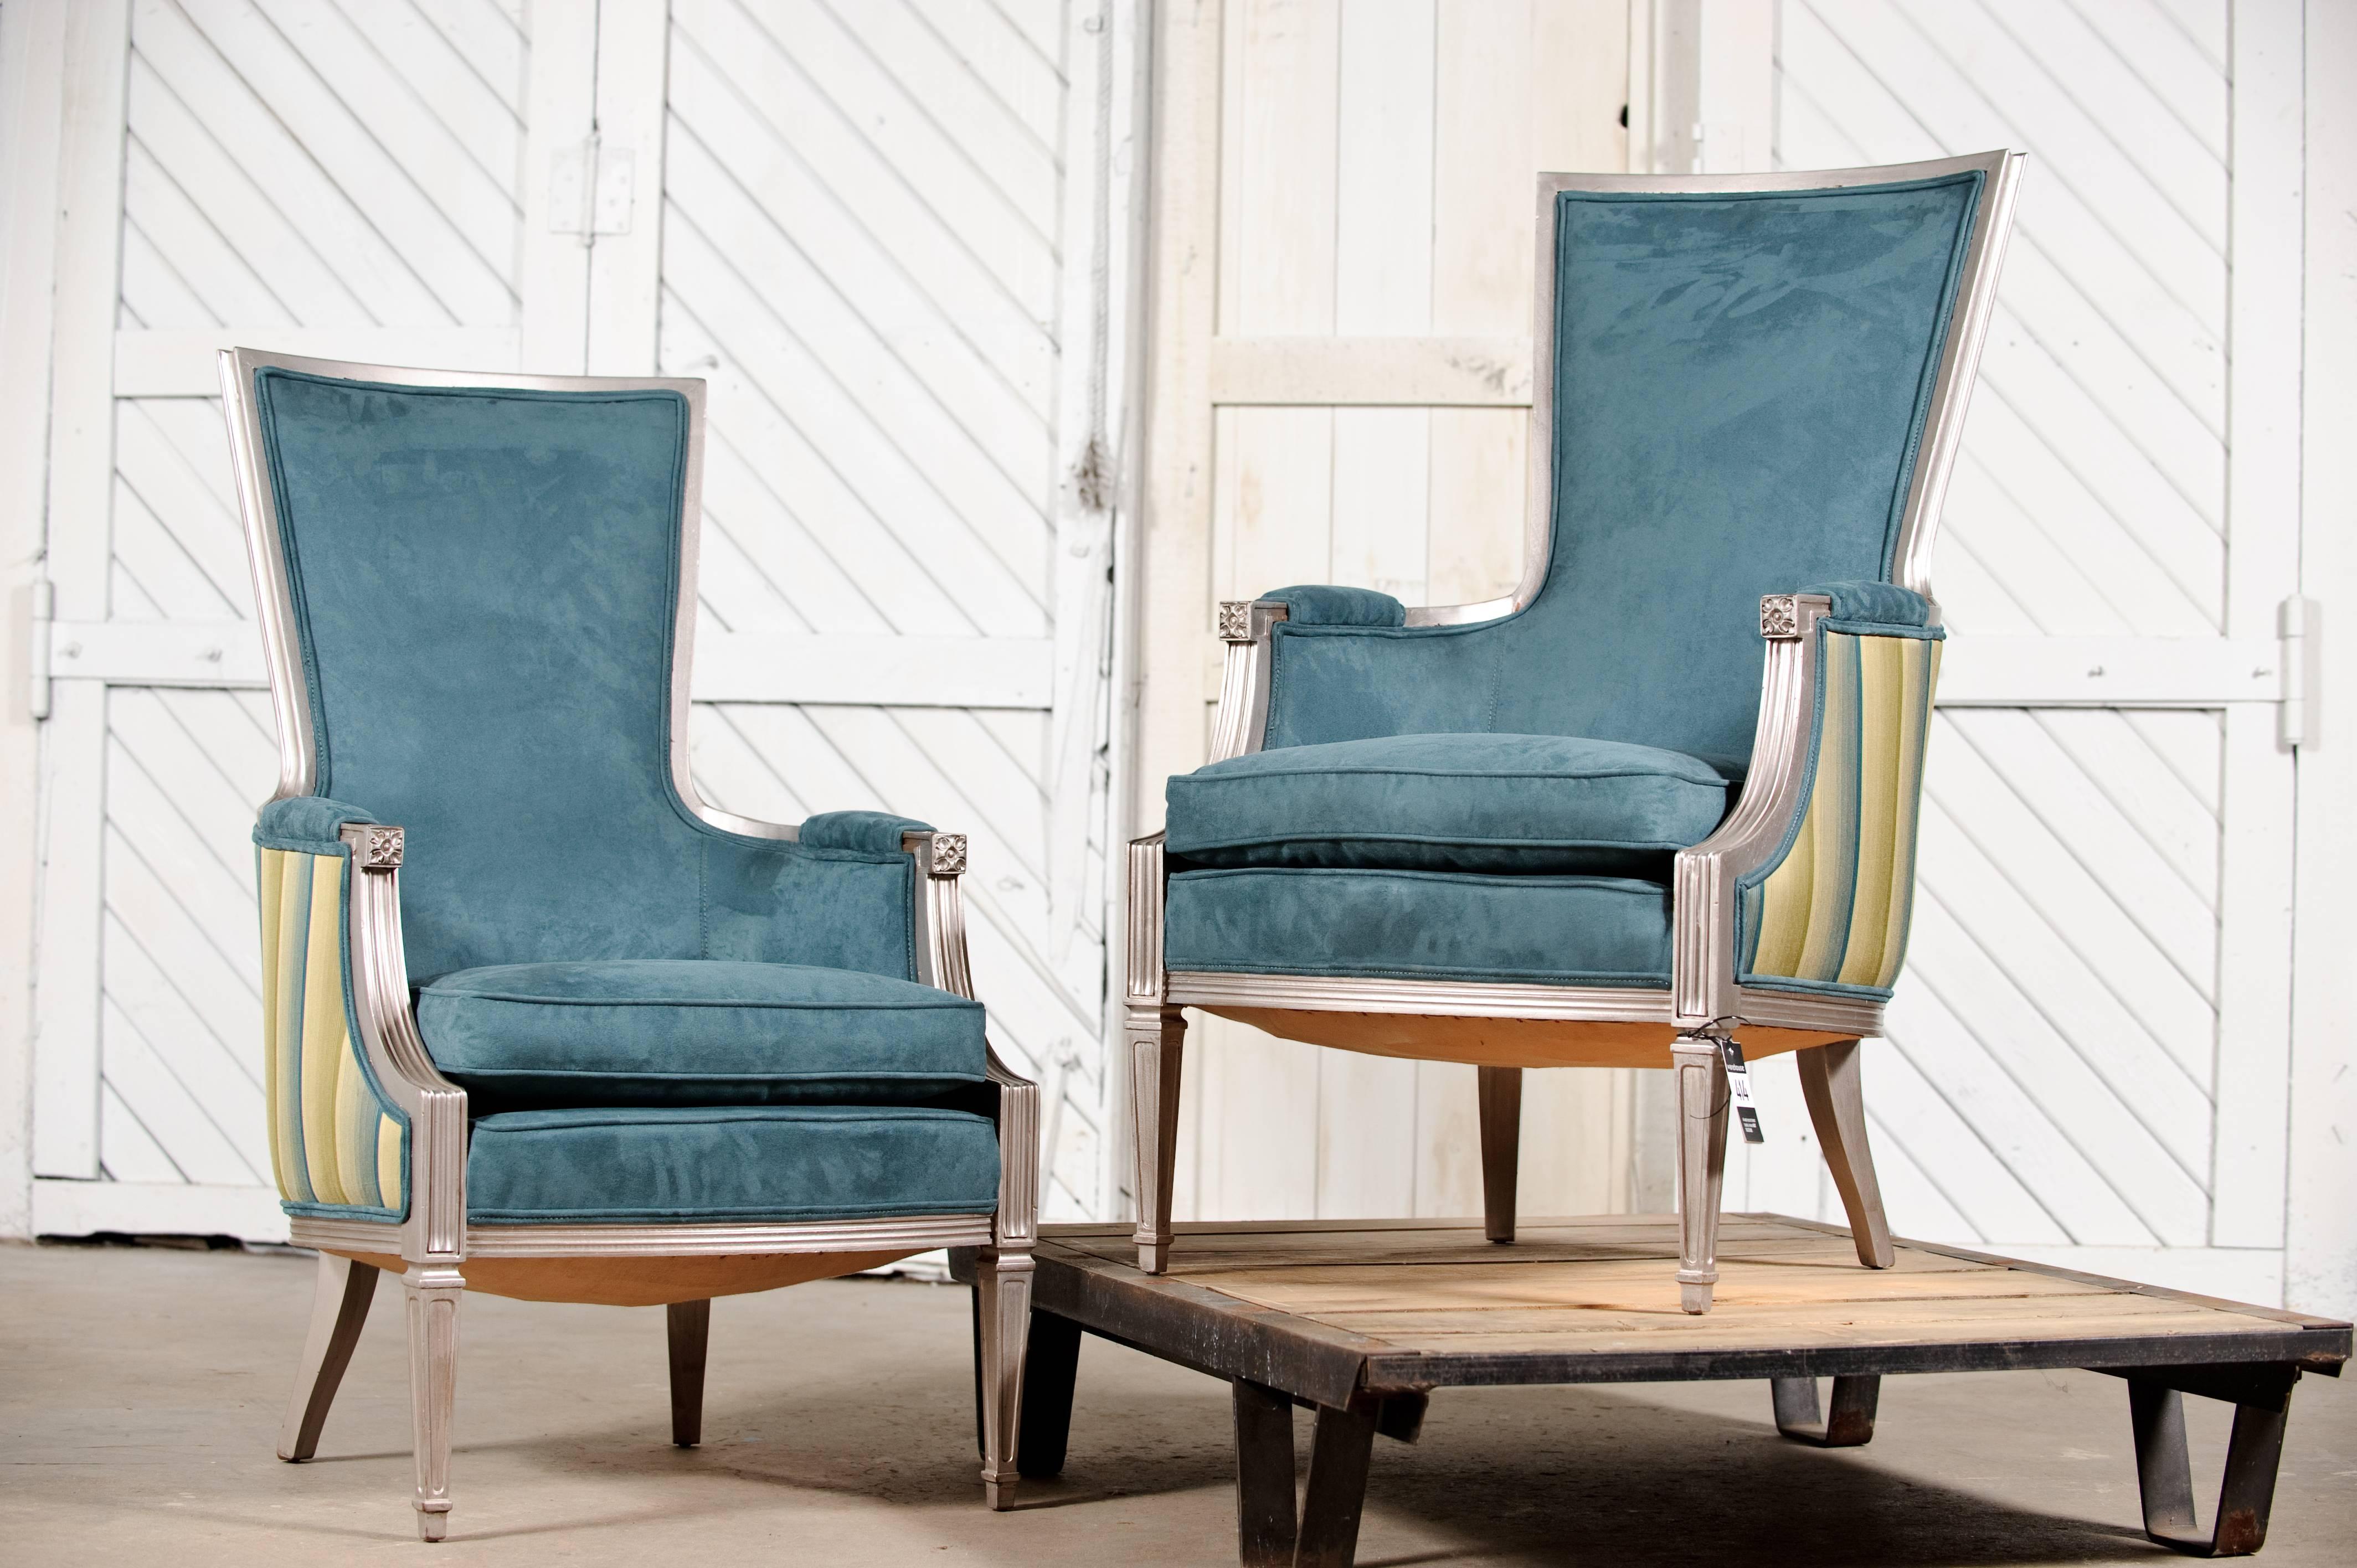 Neoclassic pair of chairs in aqua with silvered wood. Newly reupholstered in aqua ultrasuede fronts and aqua and green striped backs. The wood has been finished in a faux silver leaf. Beautiful revamped condition.

You have to love these newly